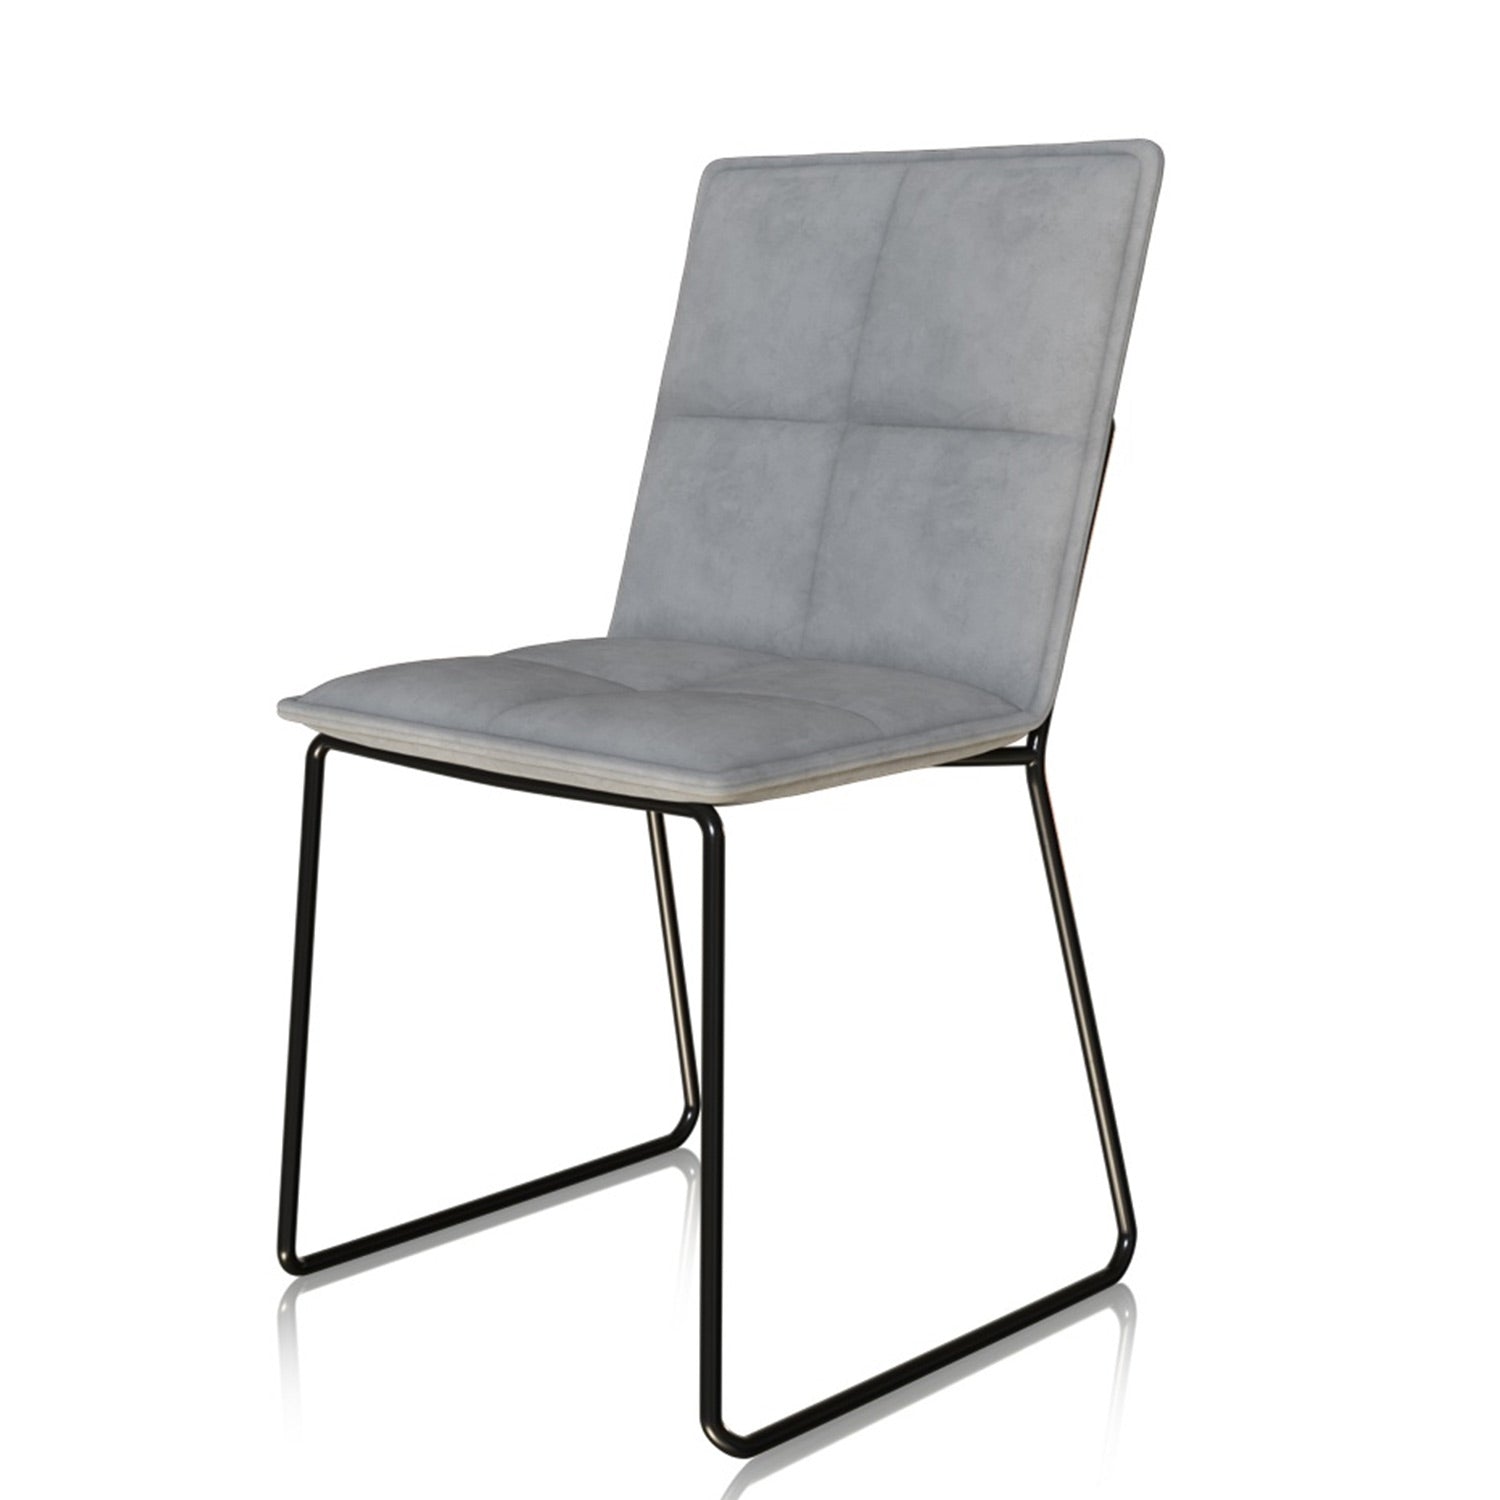 Dateo dining chair